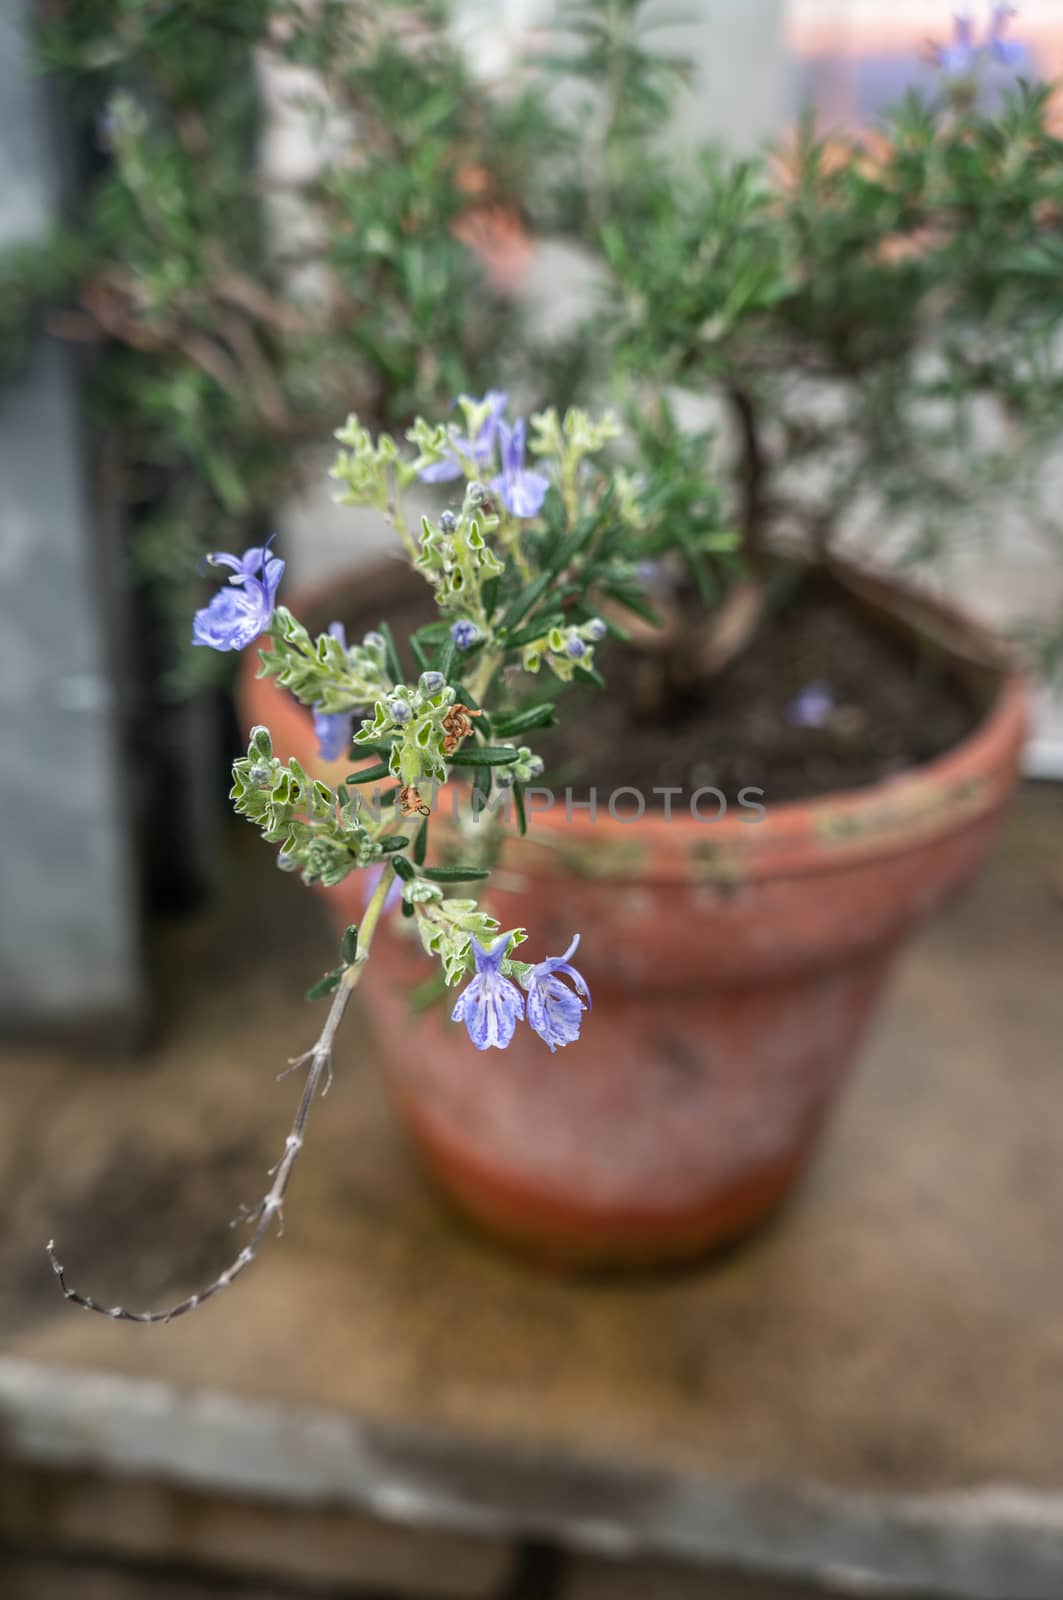 Close up with selcetive focus of rosemary flowers on branch in urban garden. Shot in natural light in clay pot in kitchen garden.